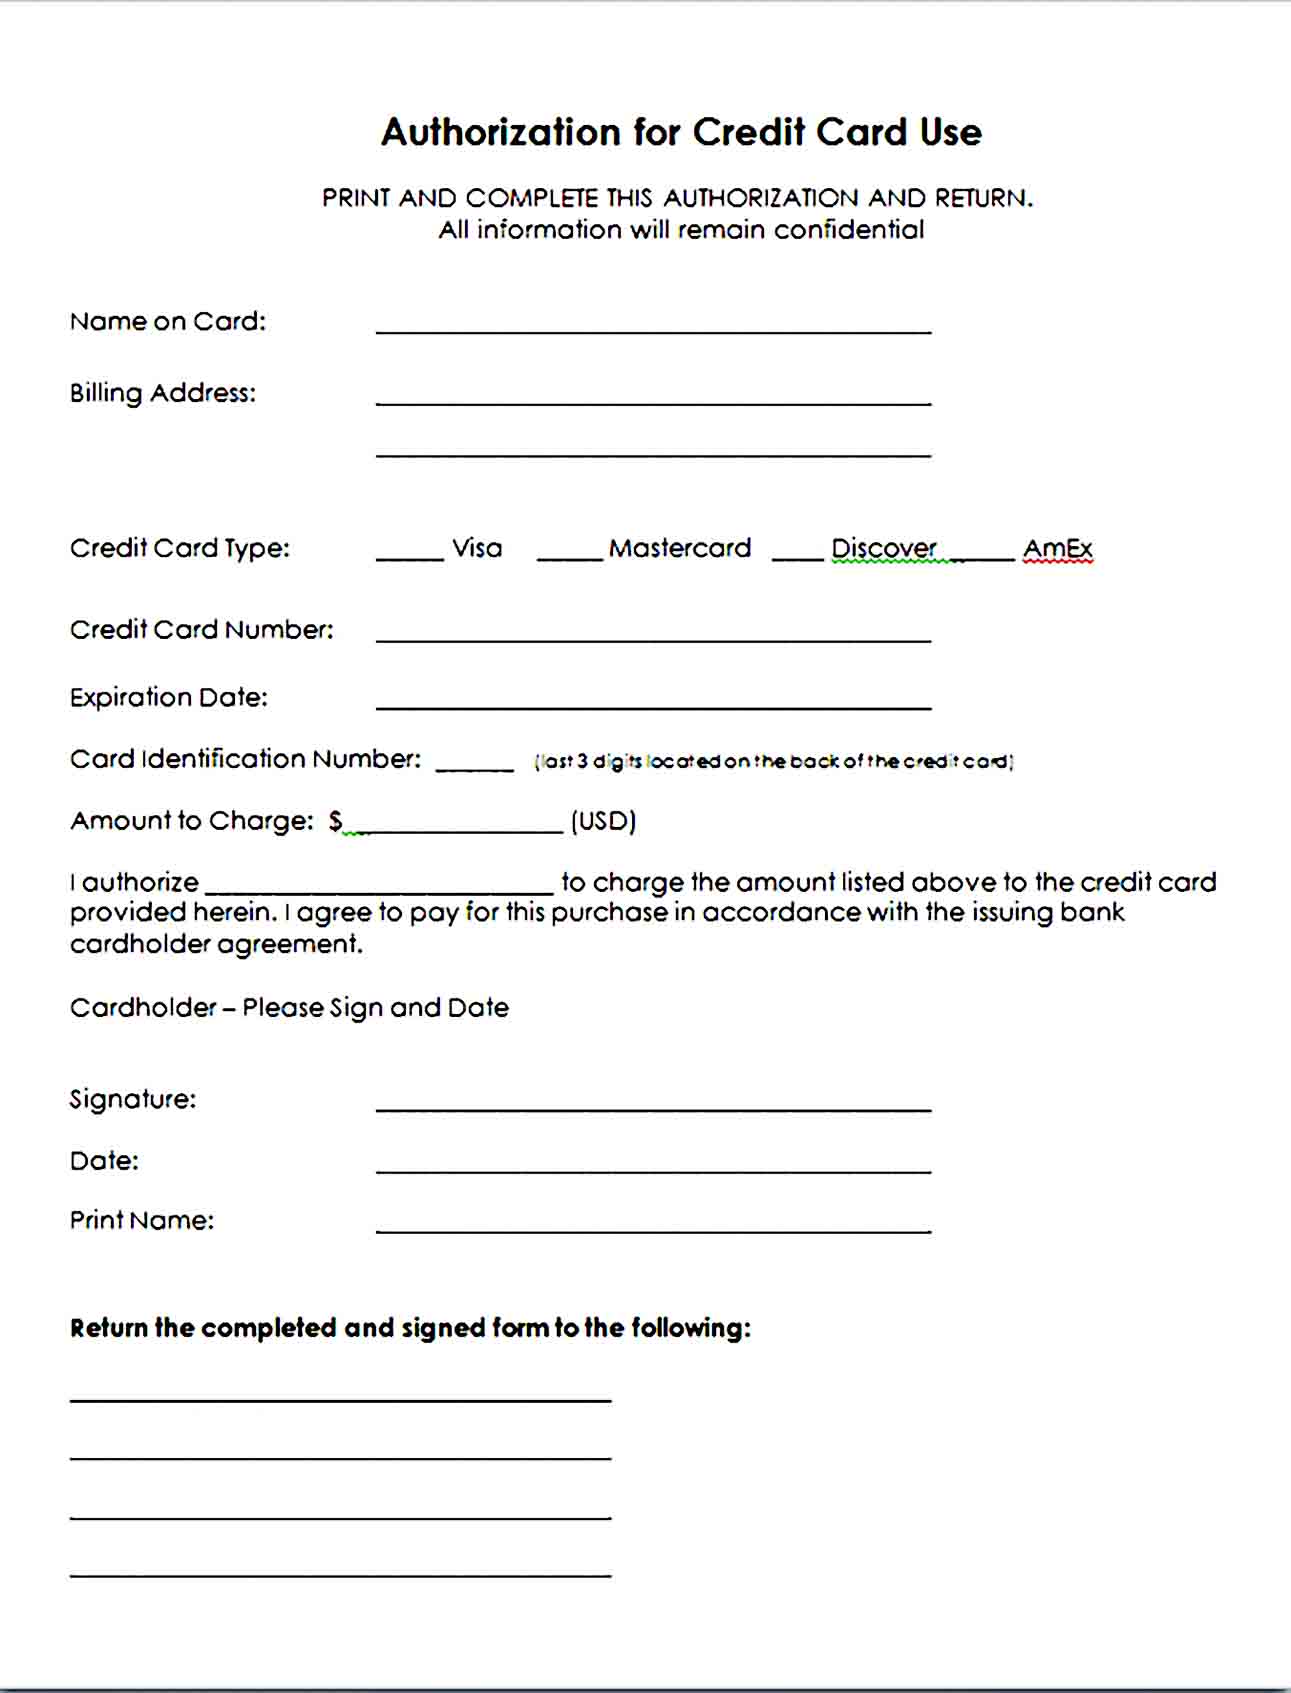 credit card authorization form template 05